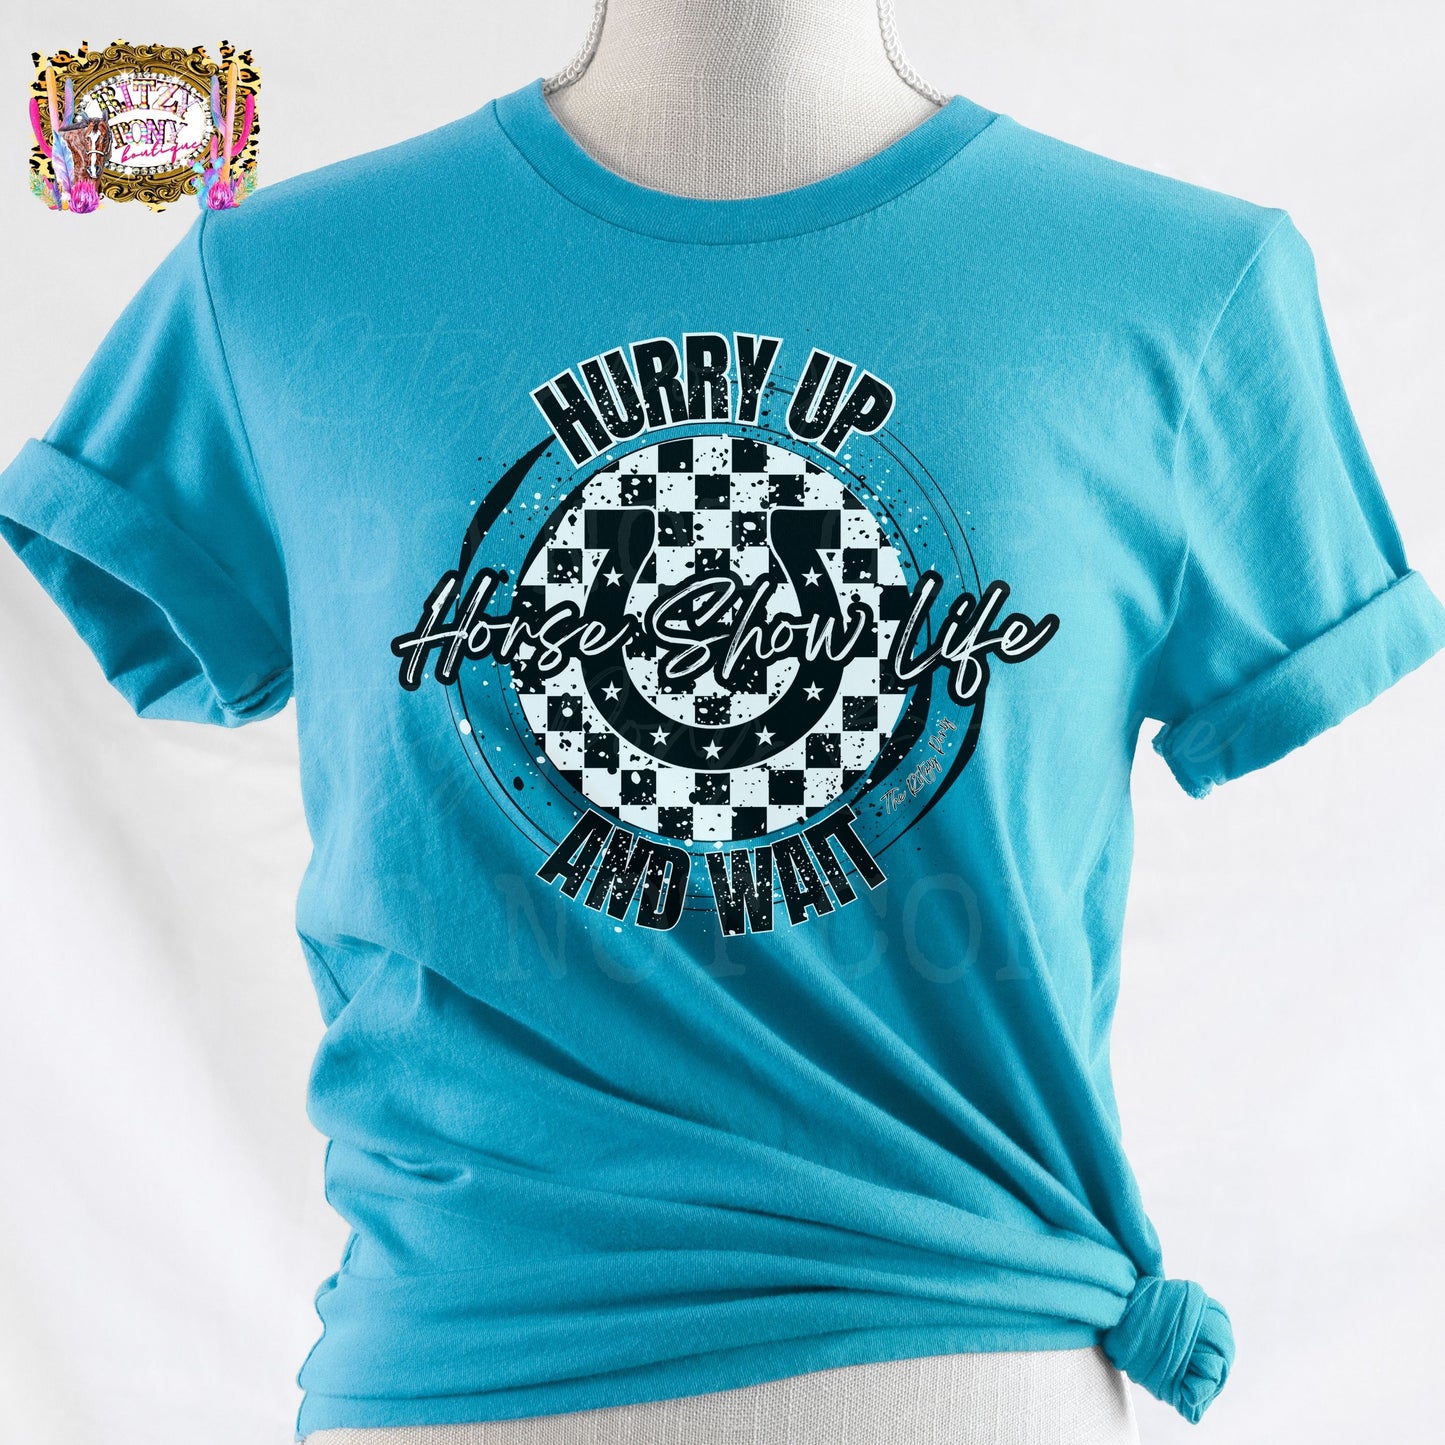 Hurry Up. Wait. Horse Show Life Tee